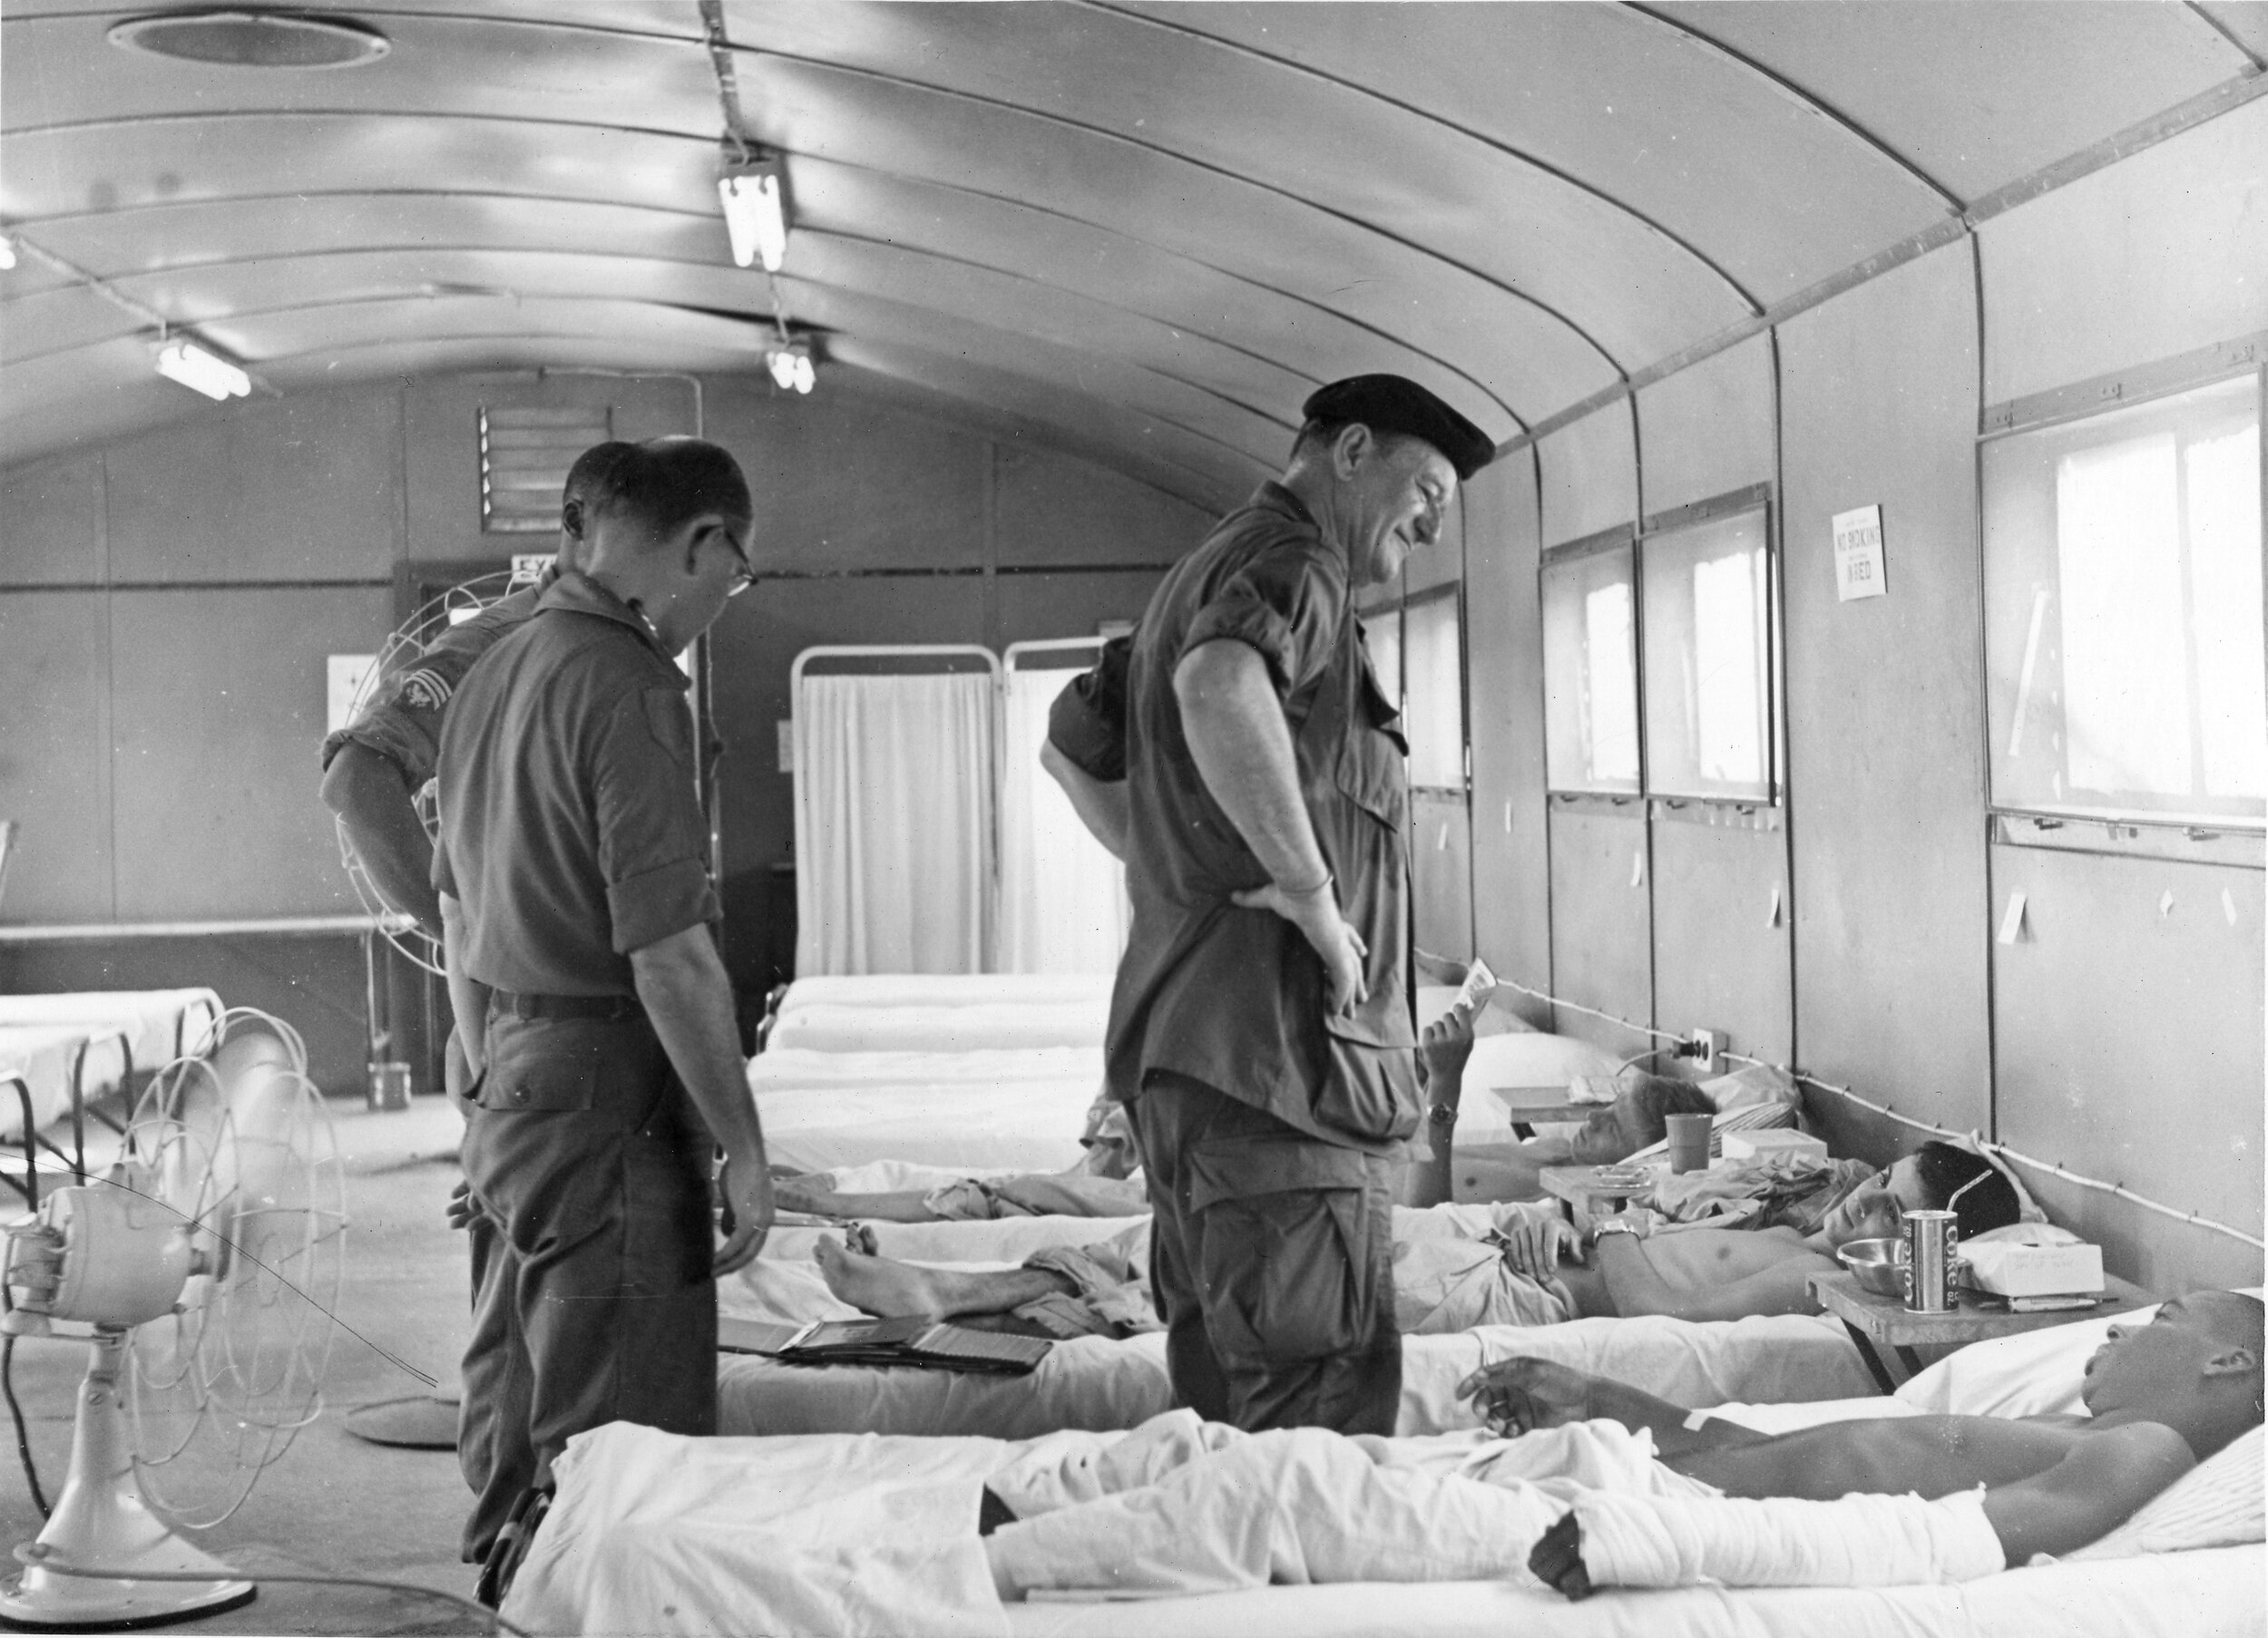 The Duke in Vietnam visiting wounded soldiers during his USO Tour.